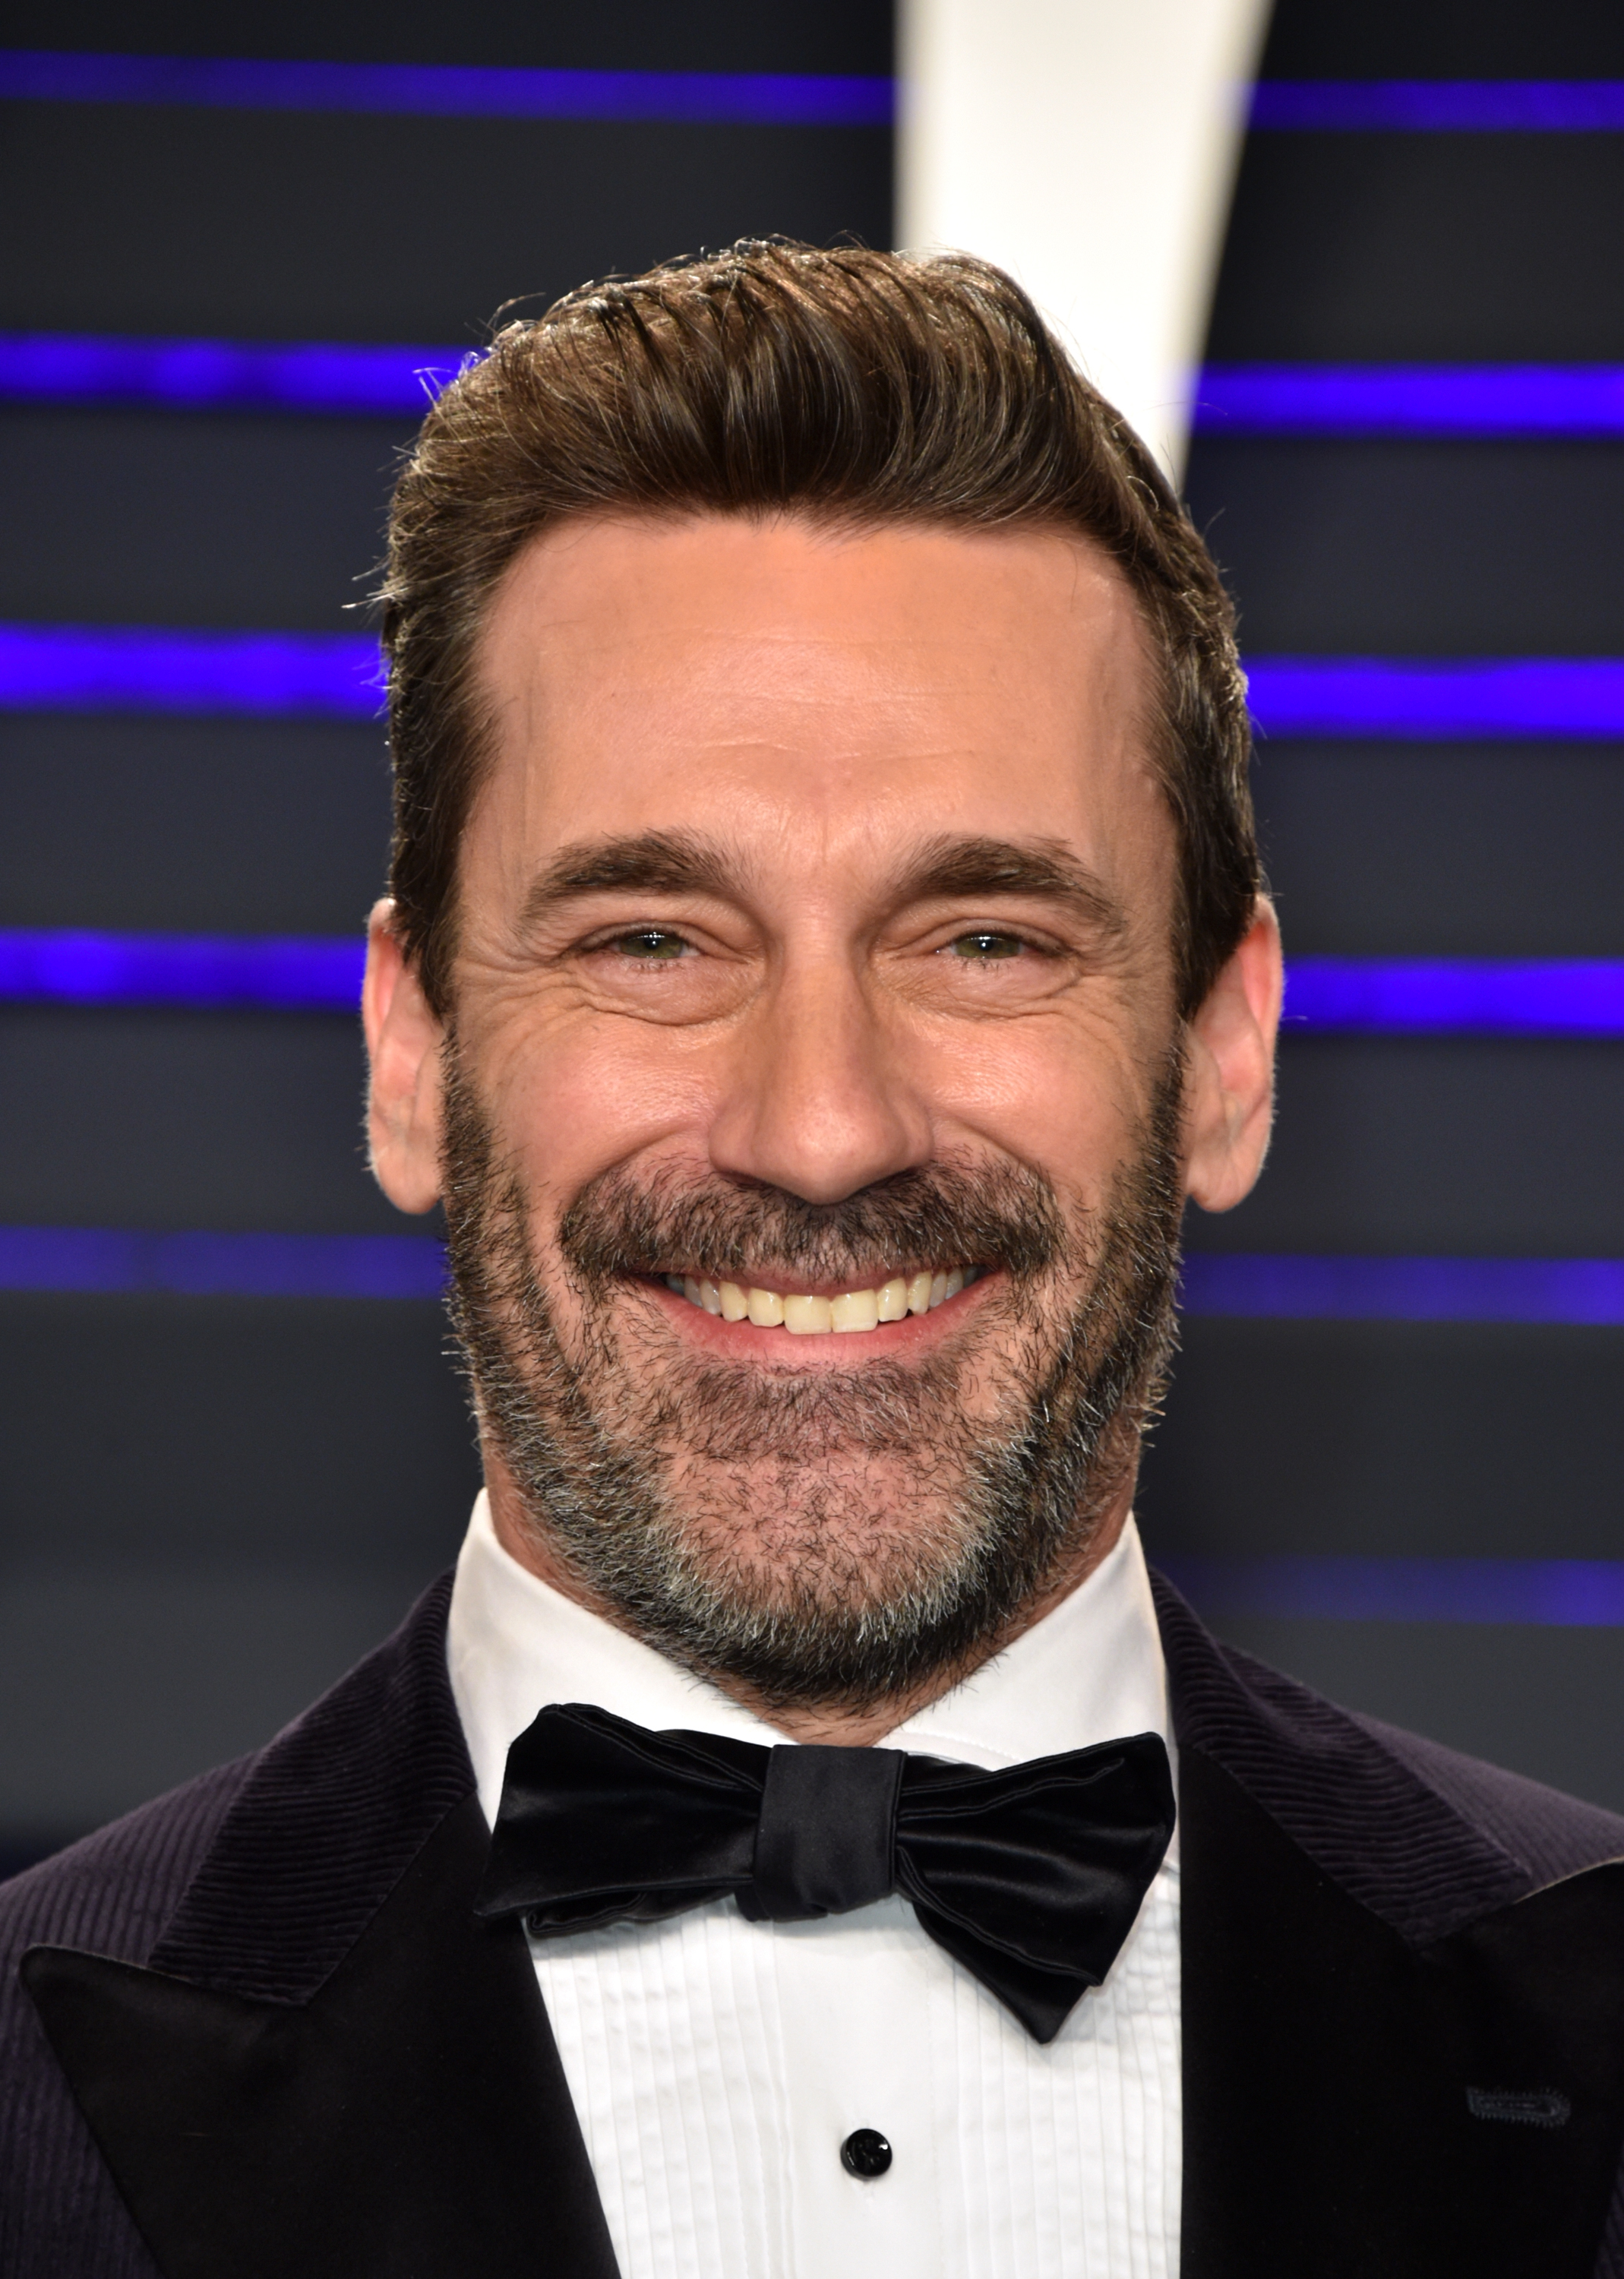 Jon Hamm attends the 2019 Vanity Fair Oscar Party  at Wallis Annenberg Center for the Performing Arts on February 24, 2019 in Beverly Hills, California | Source: Getty Images